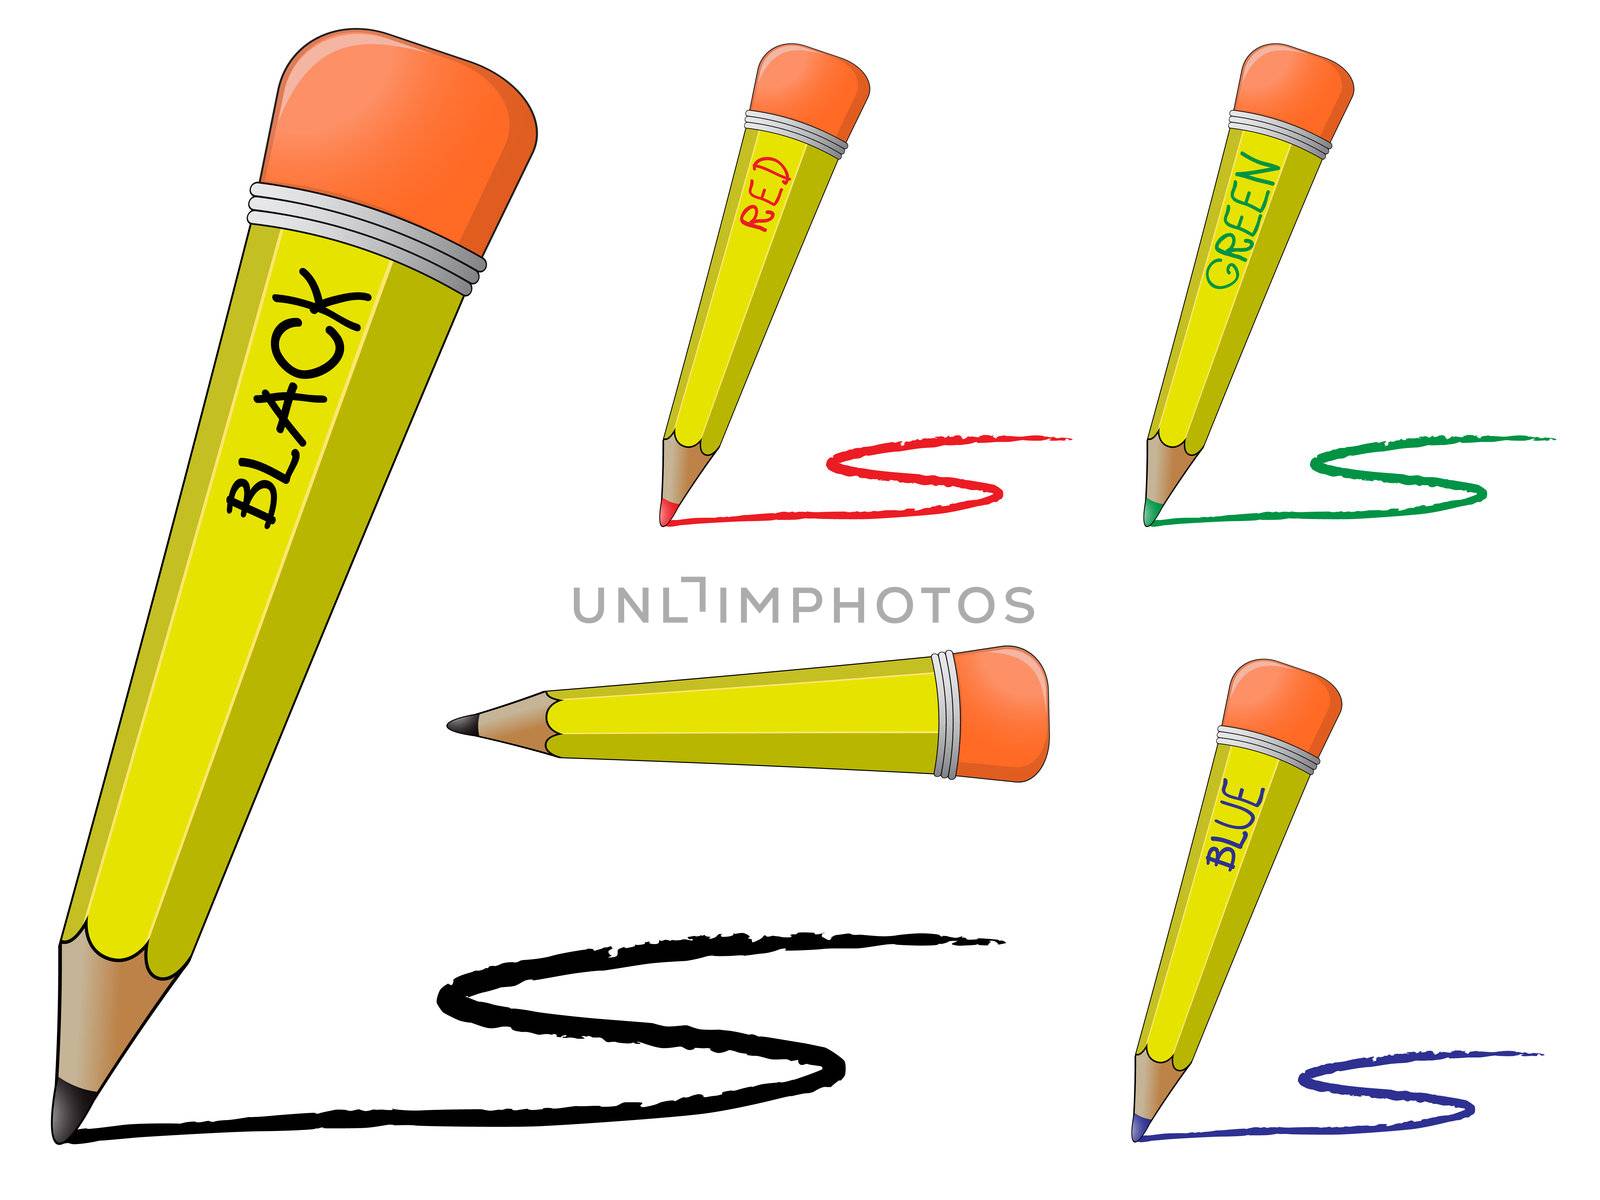 black and colored pencils against white background, abstract vector art illustration